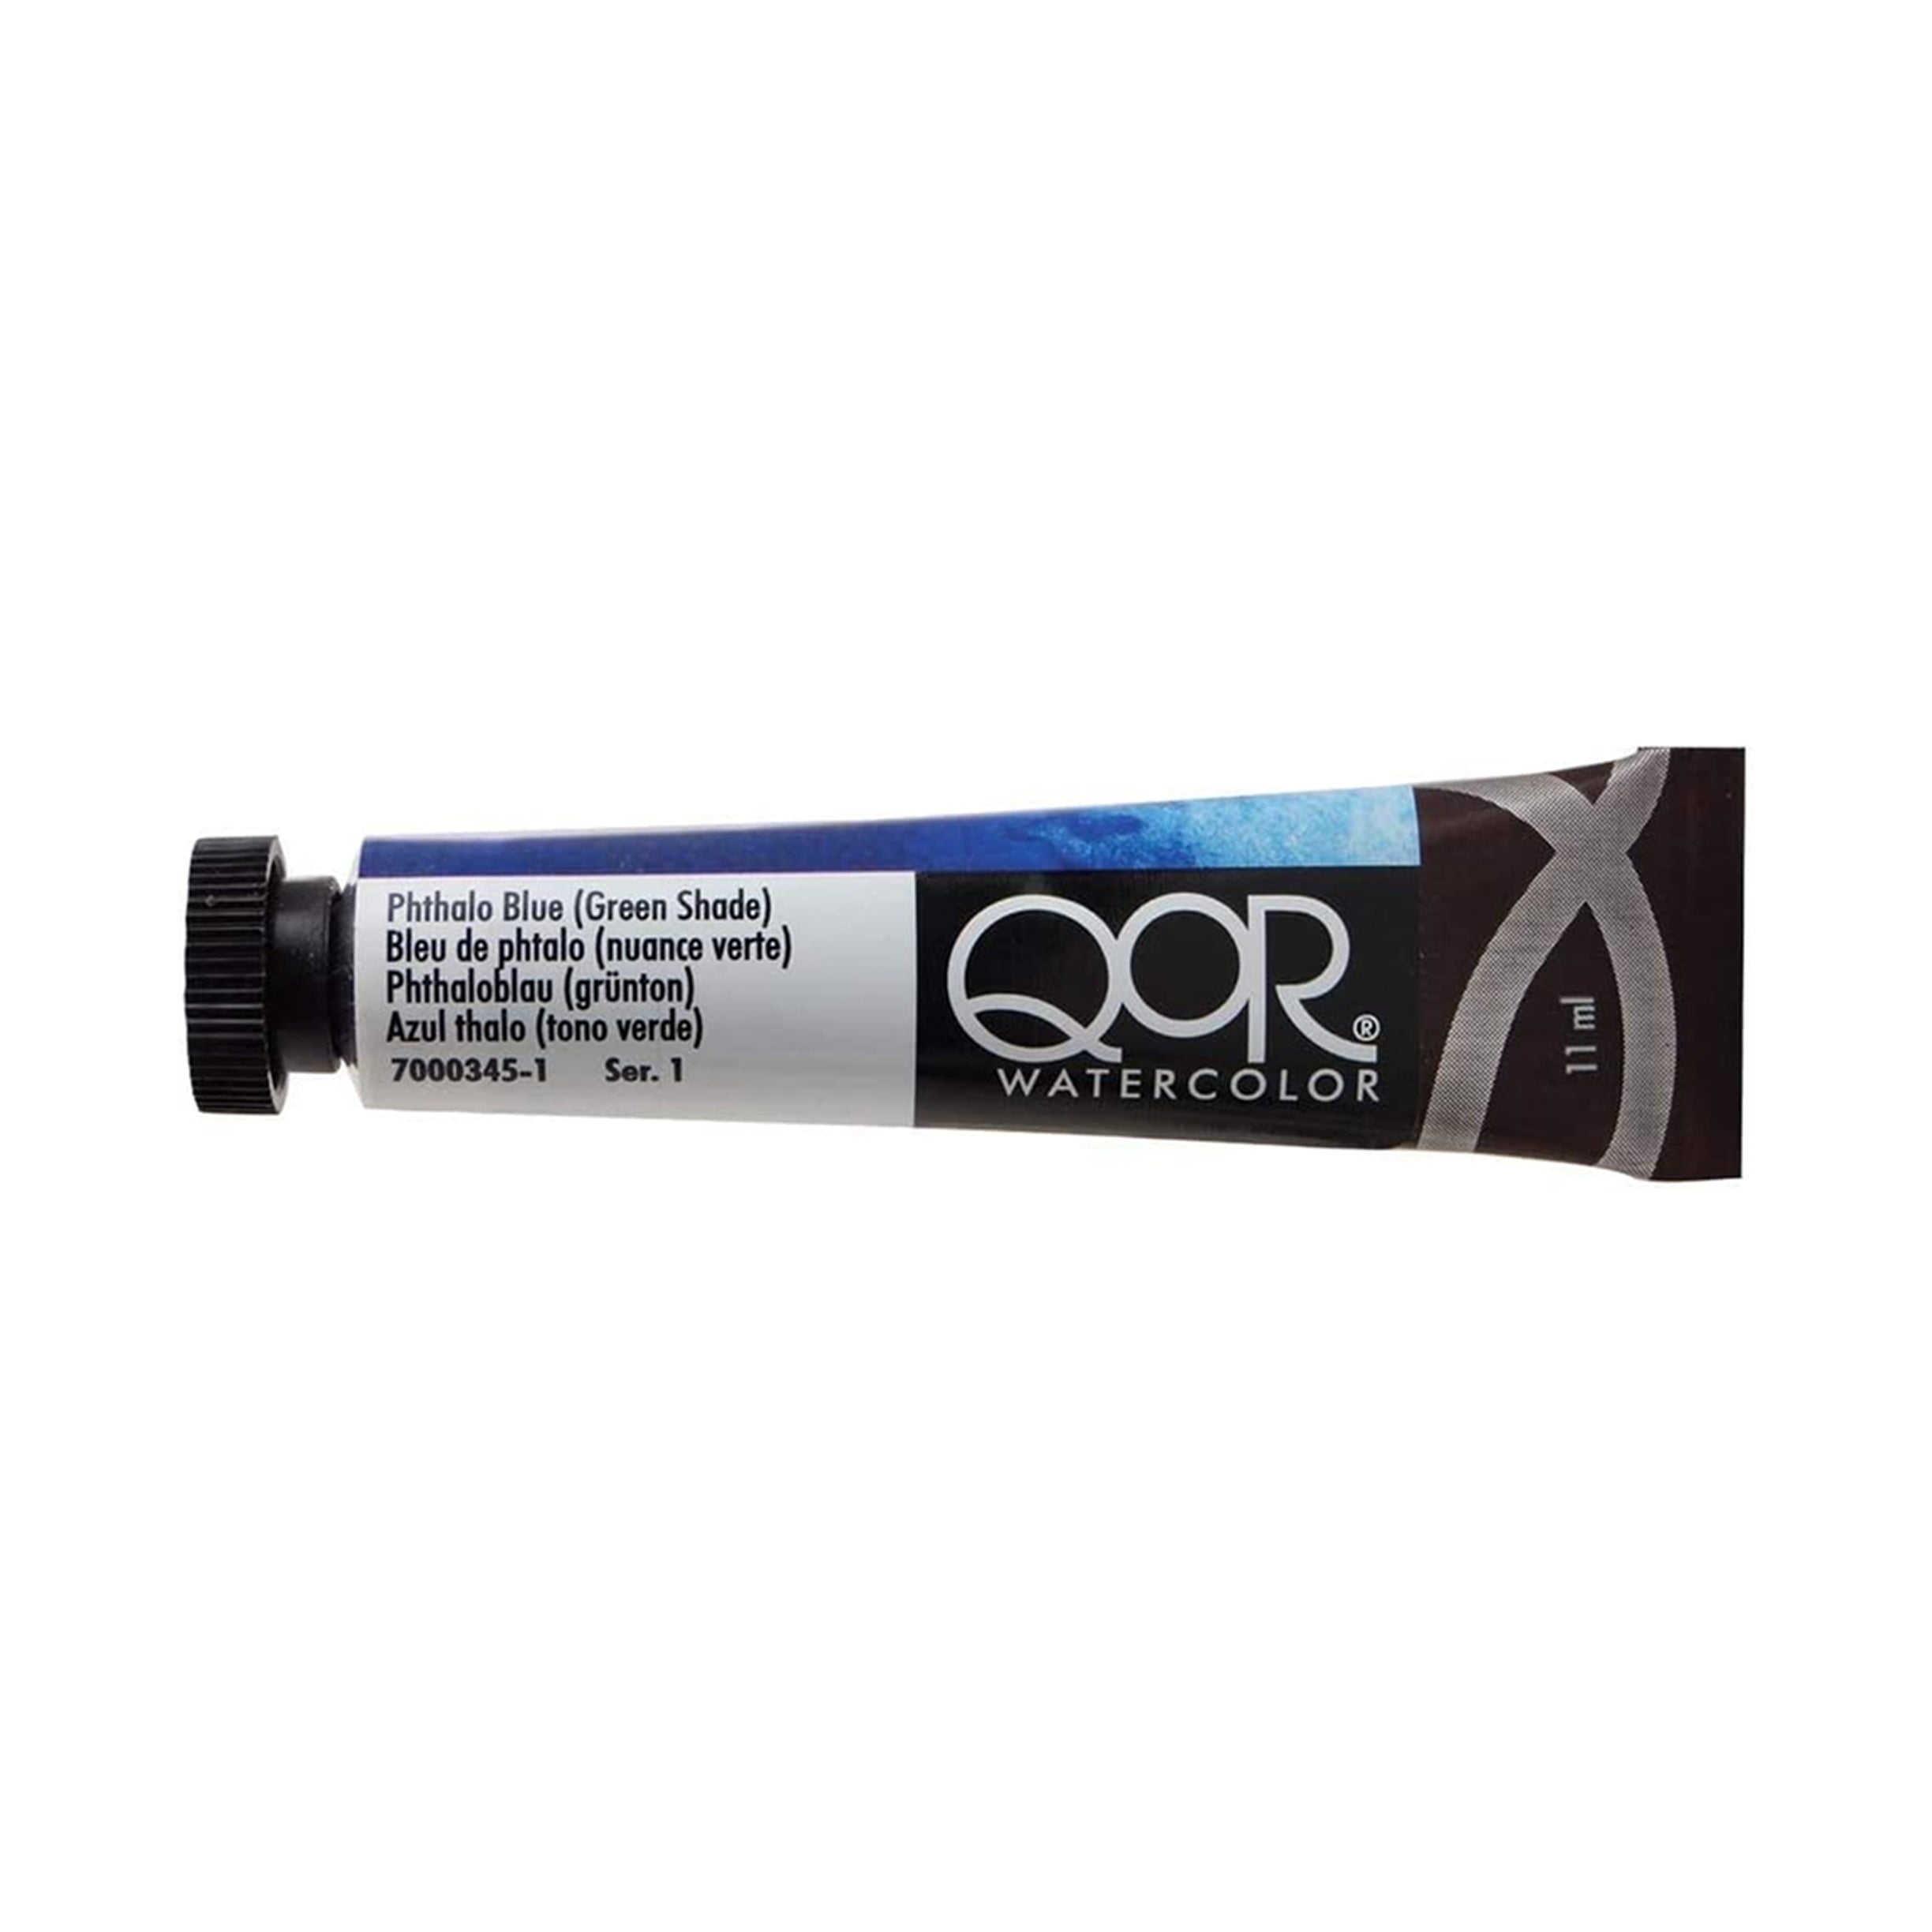 QoR Watercolor by GOLDEN, 11ml Tube